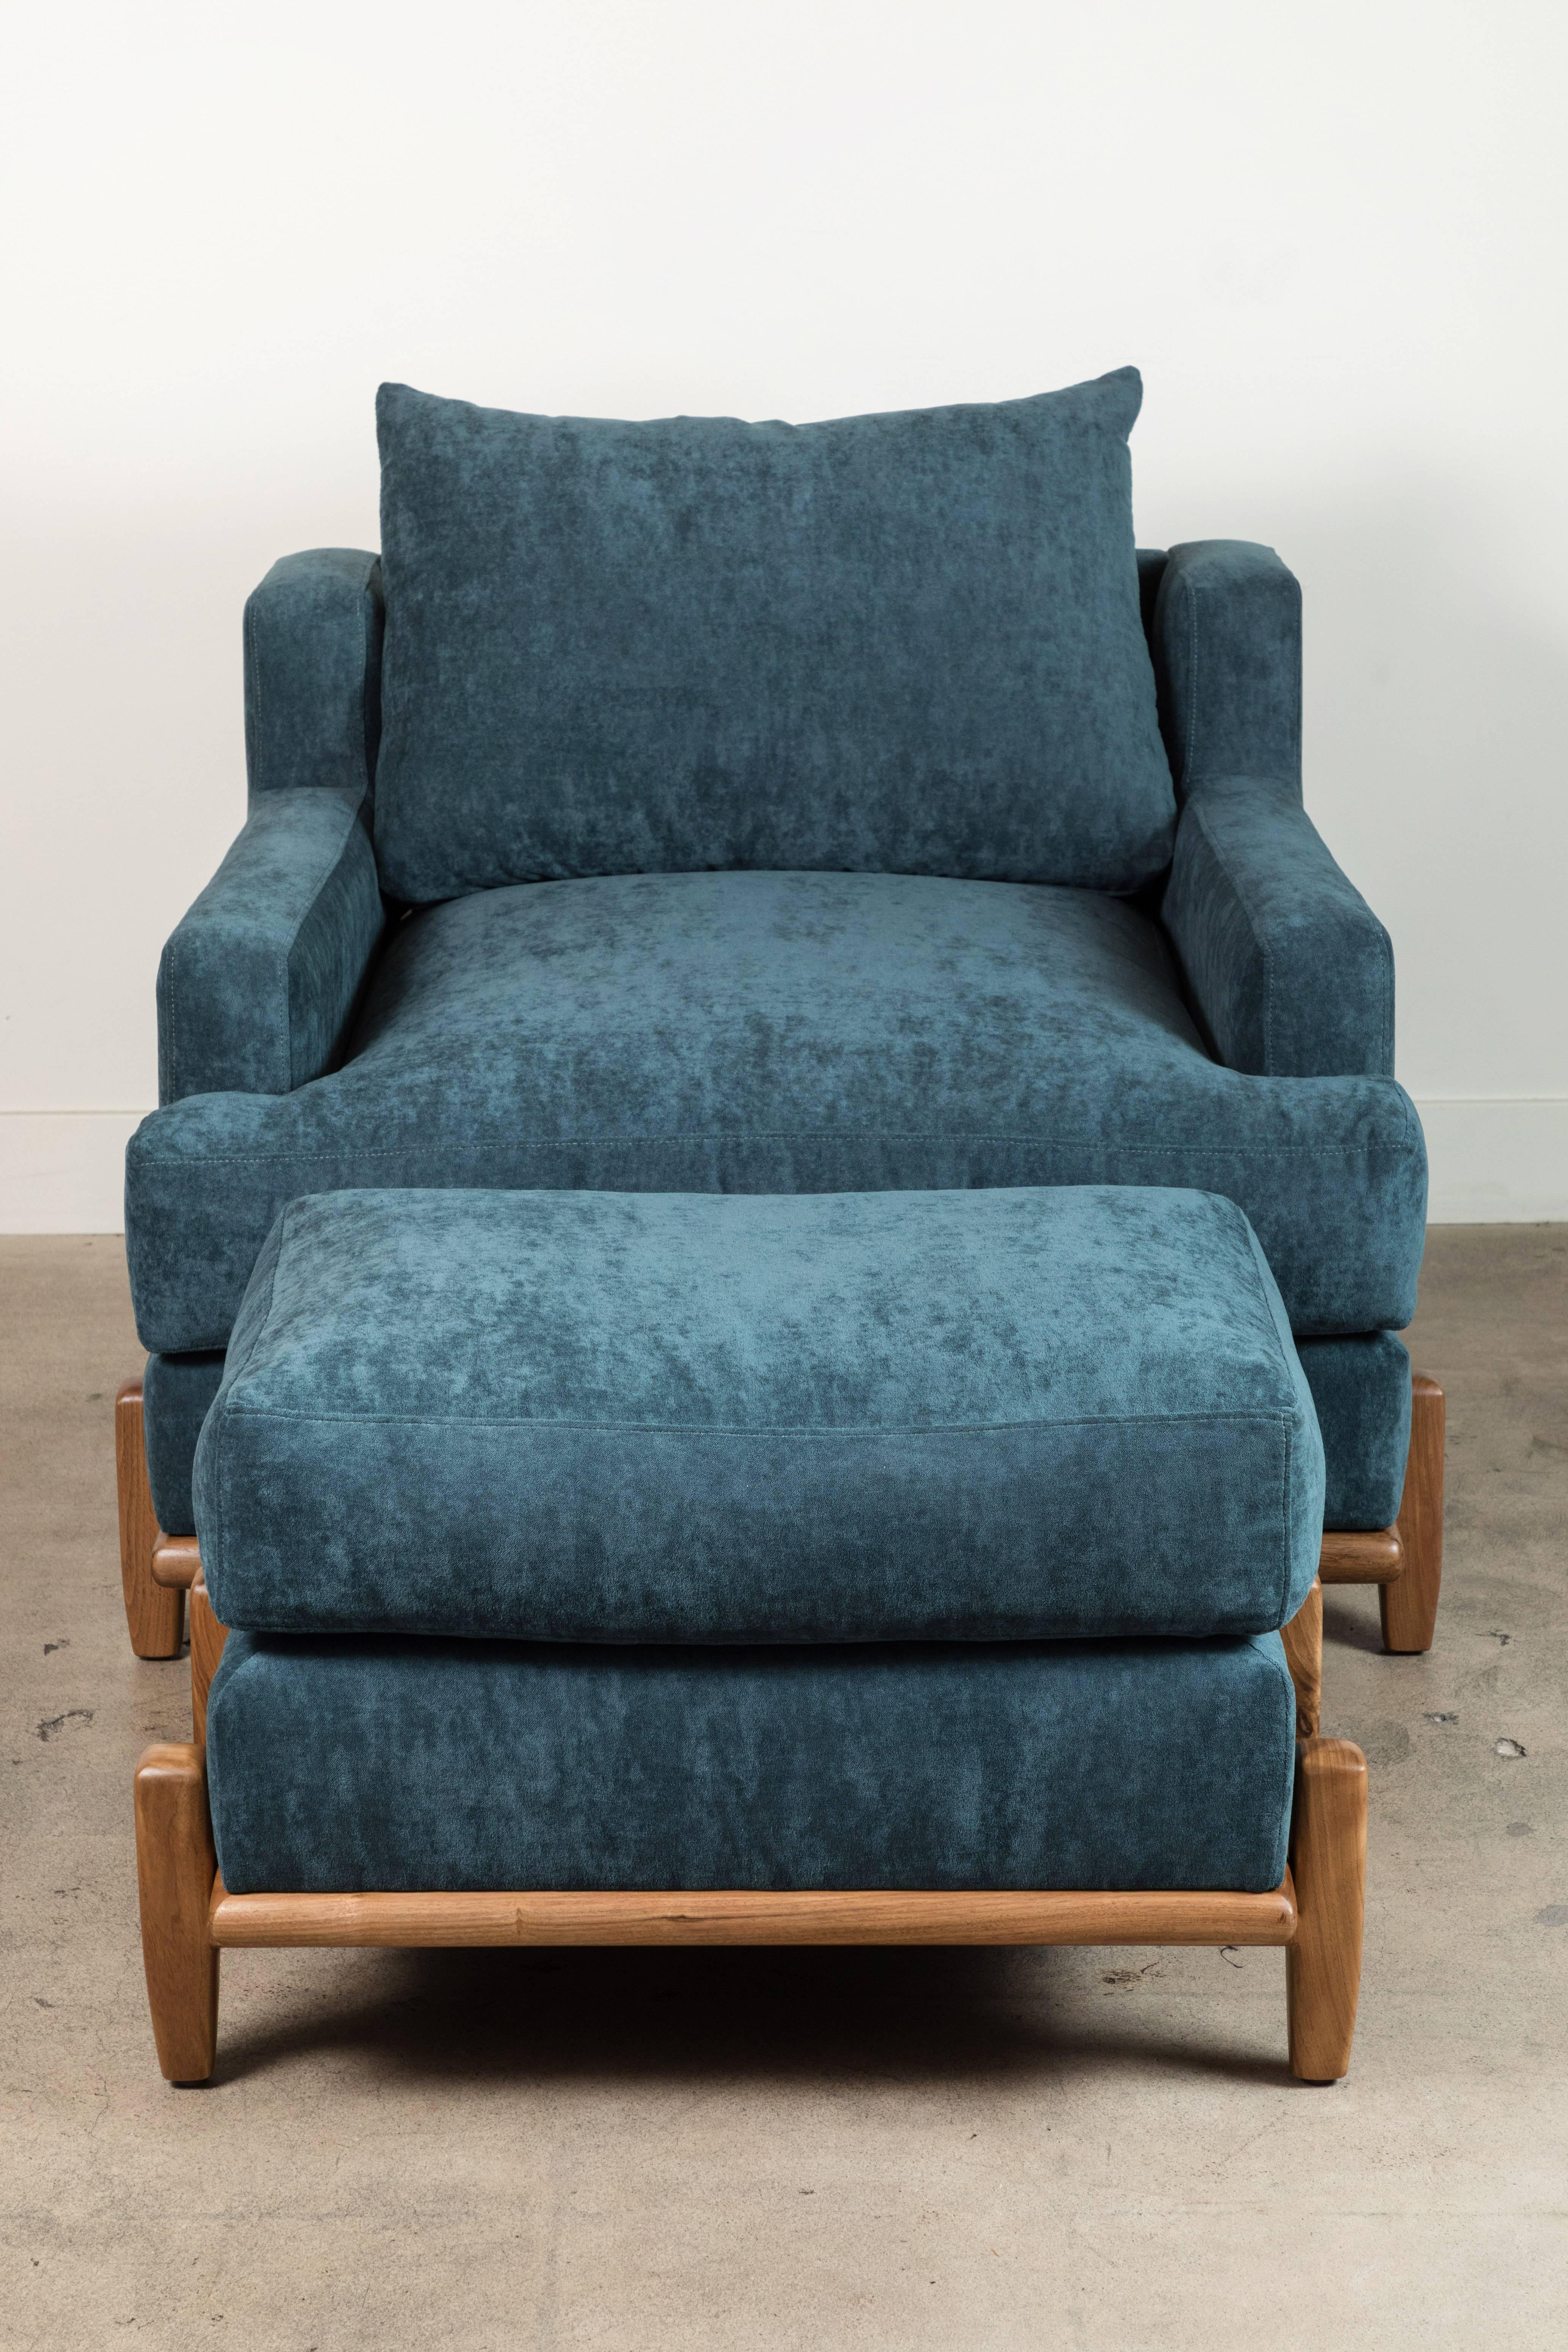 George Chair by Brian Paquette for Lawson-Fenning 2